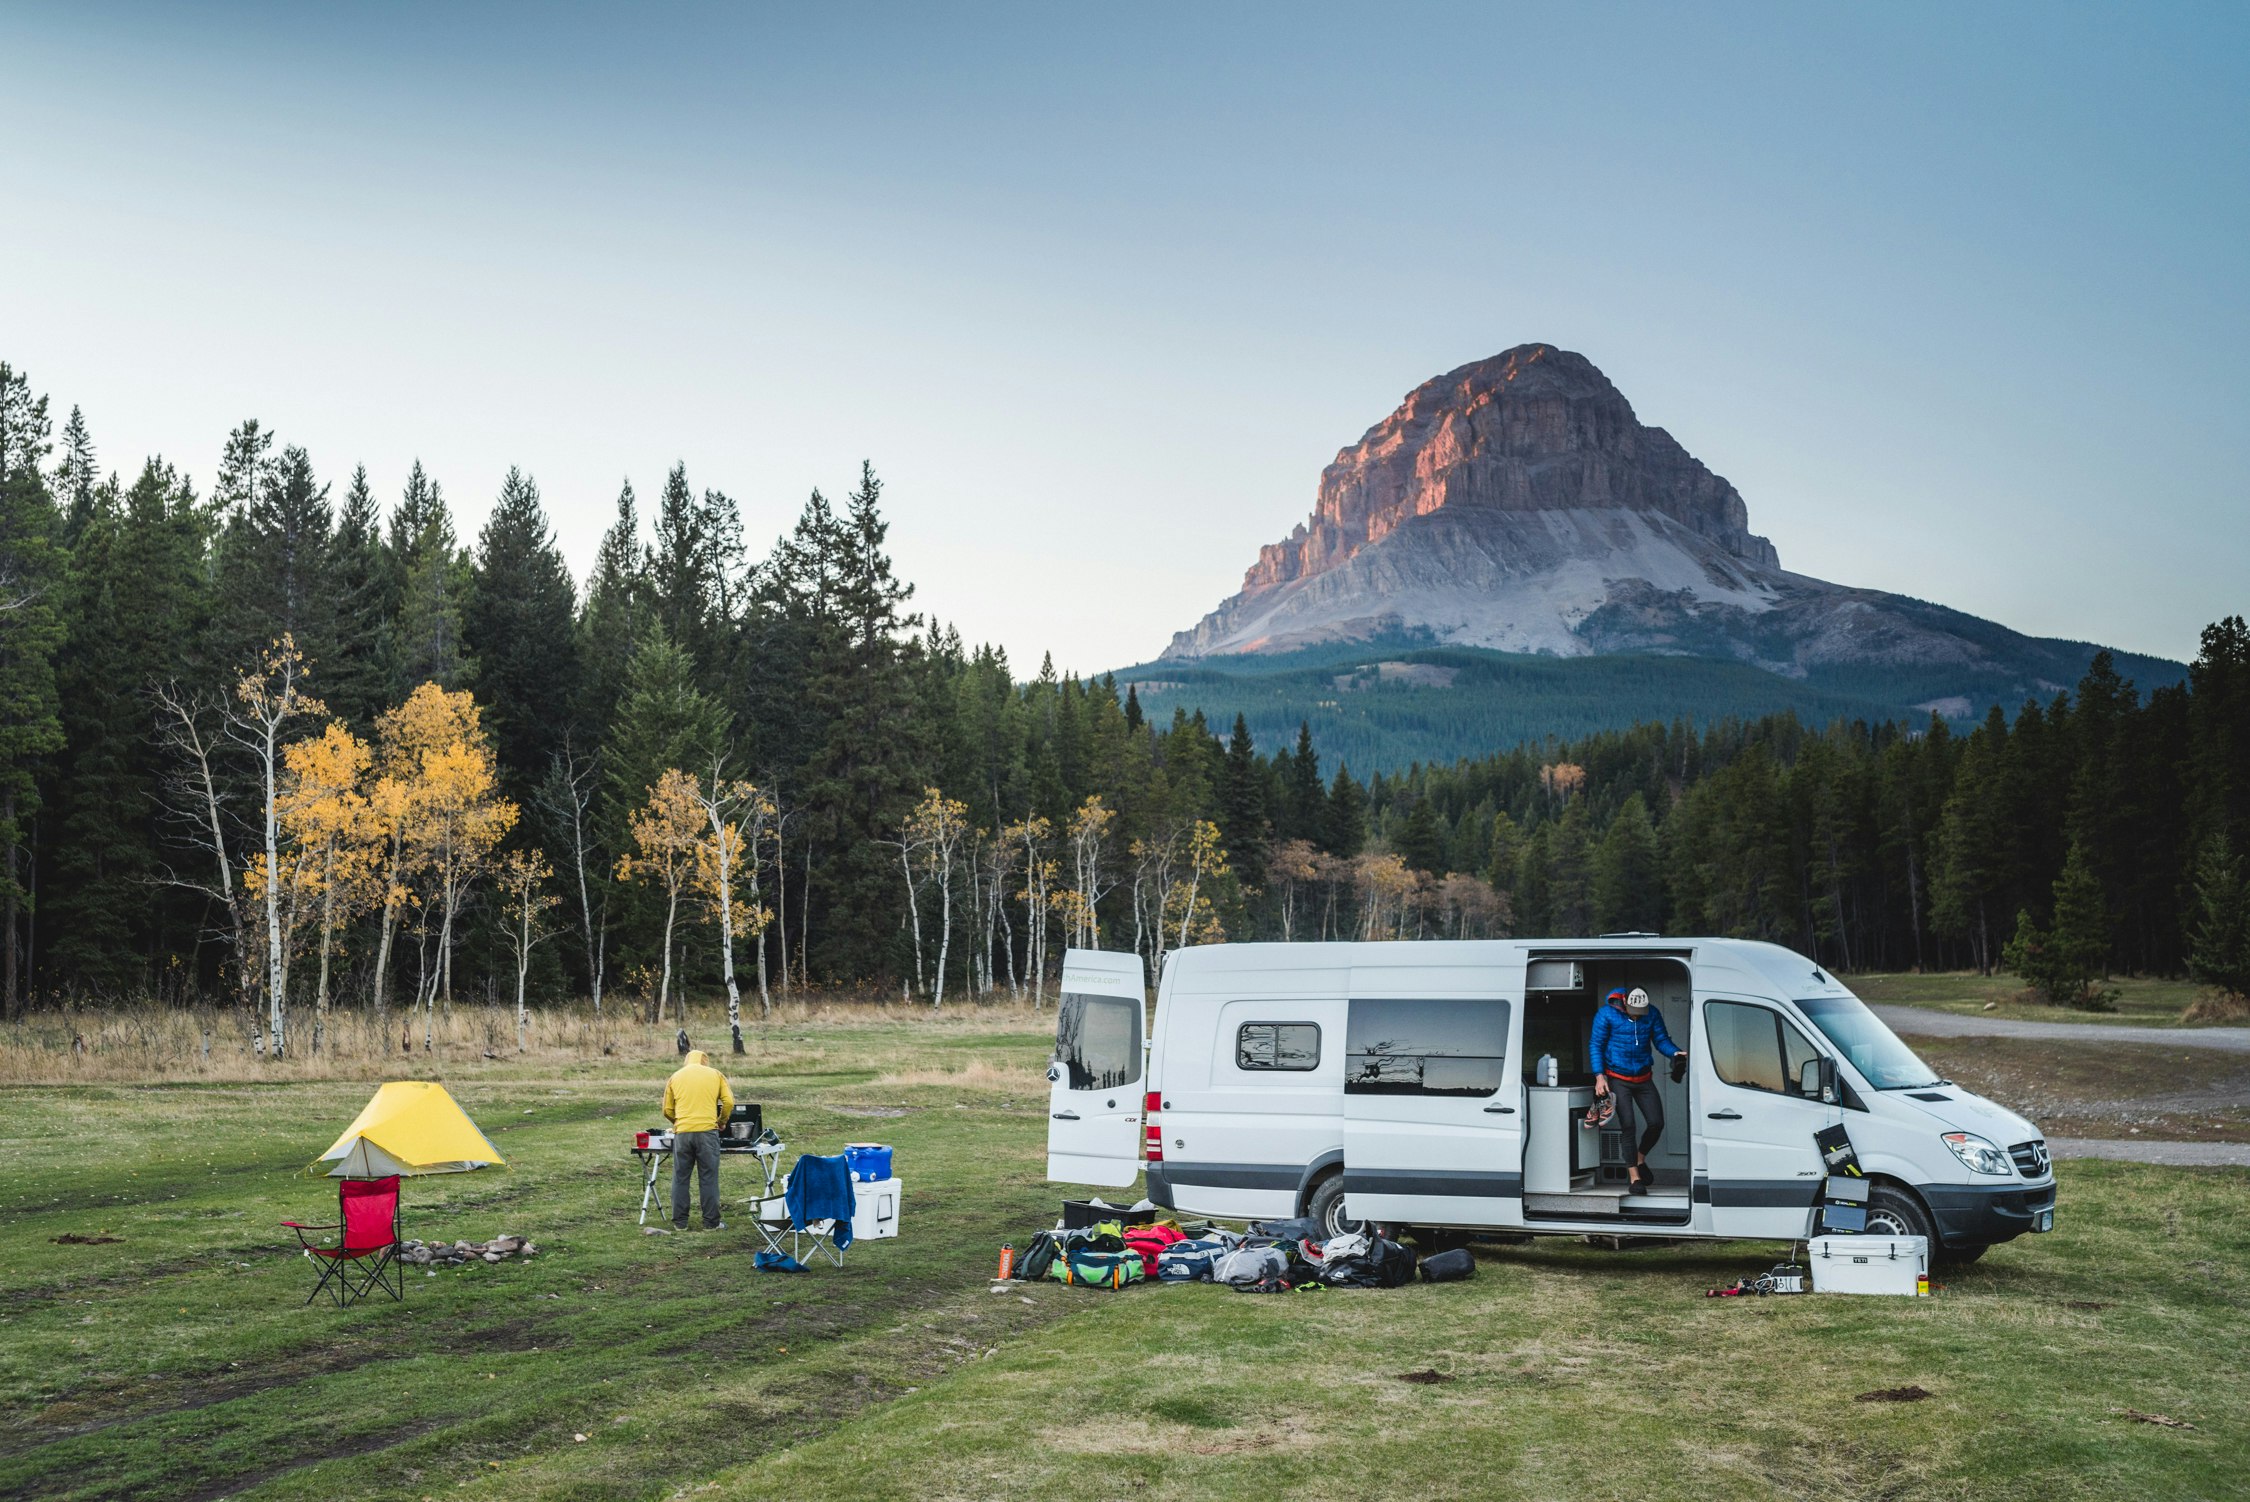 a white campervan parked in a grassy field surrounded by trees and mountains and people setting up camp